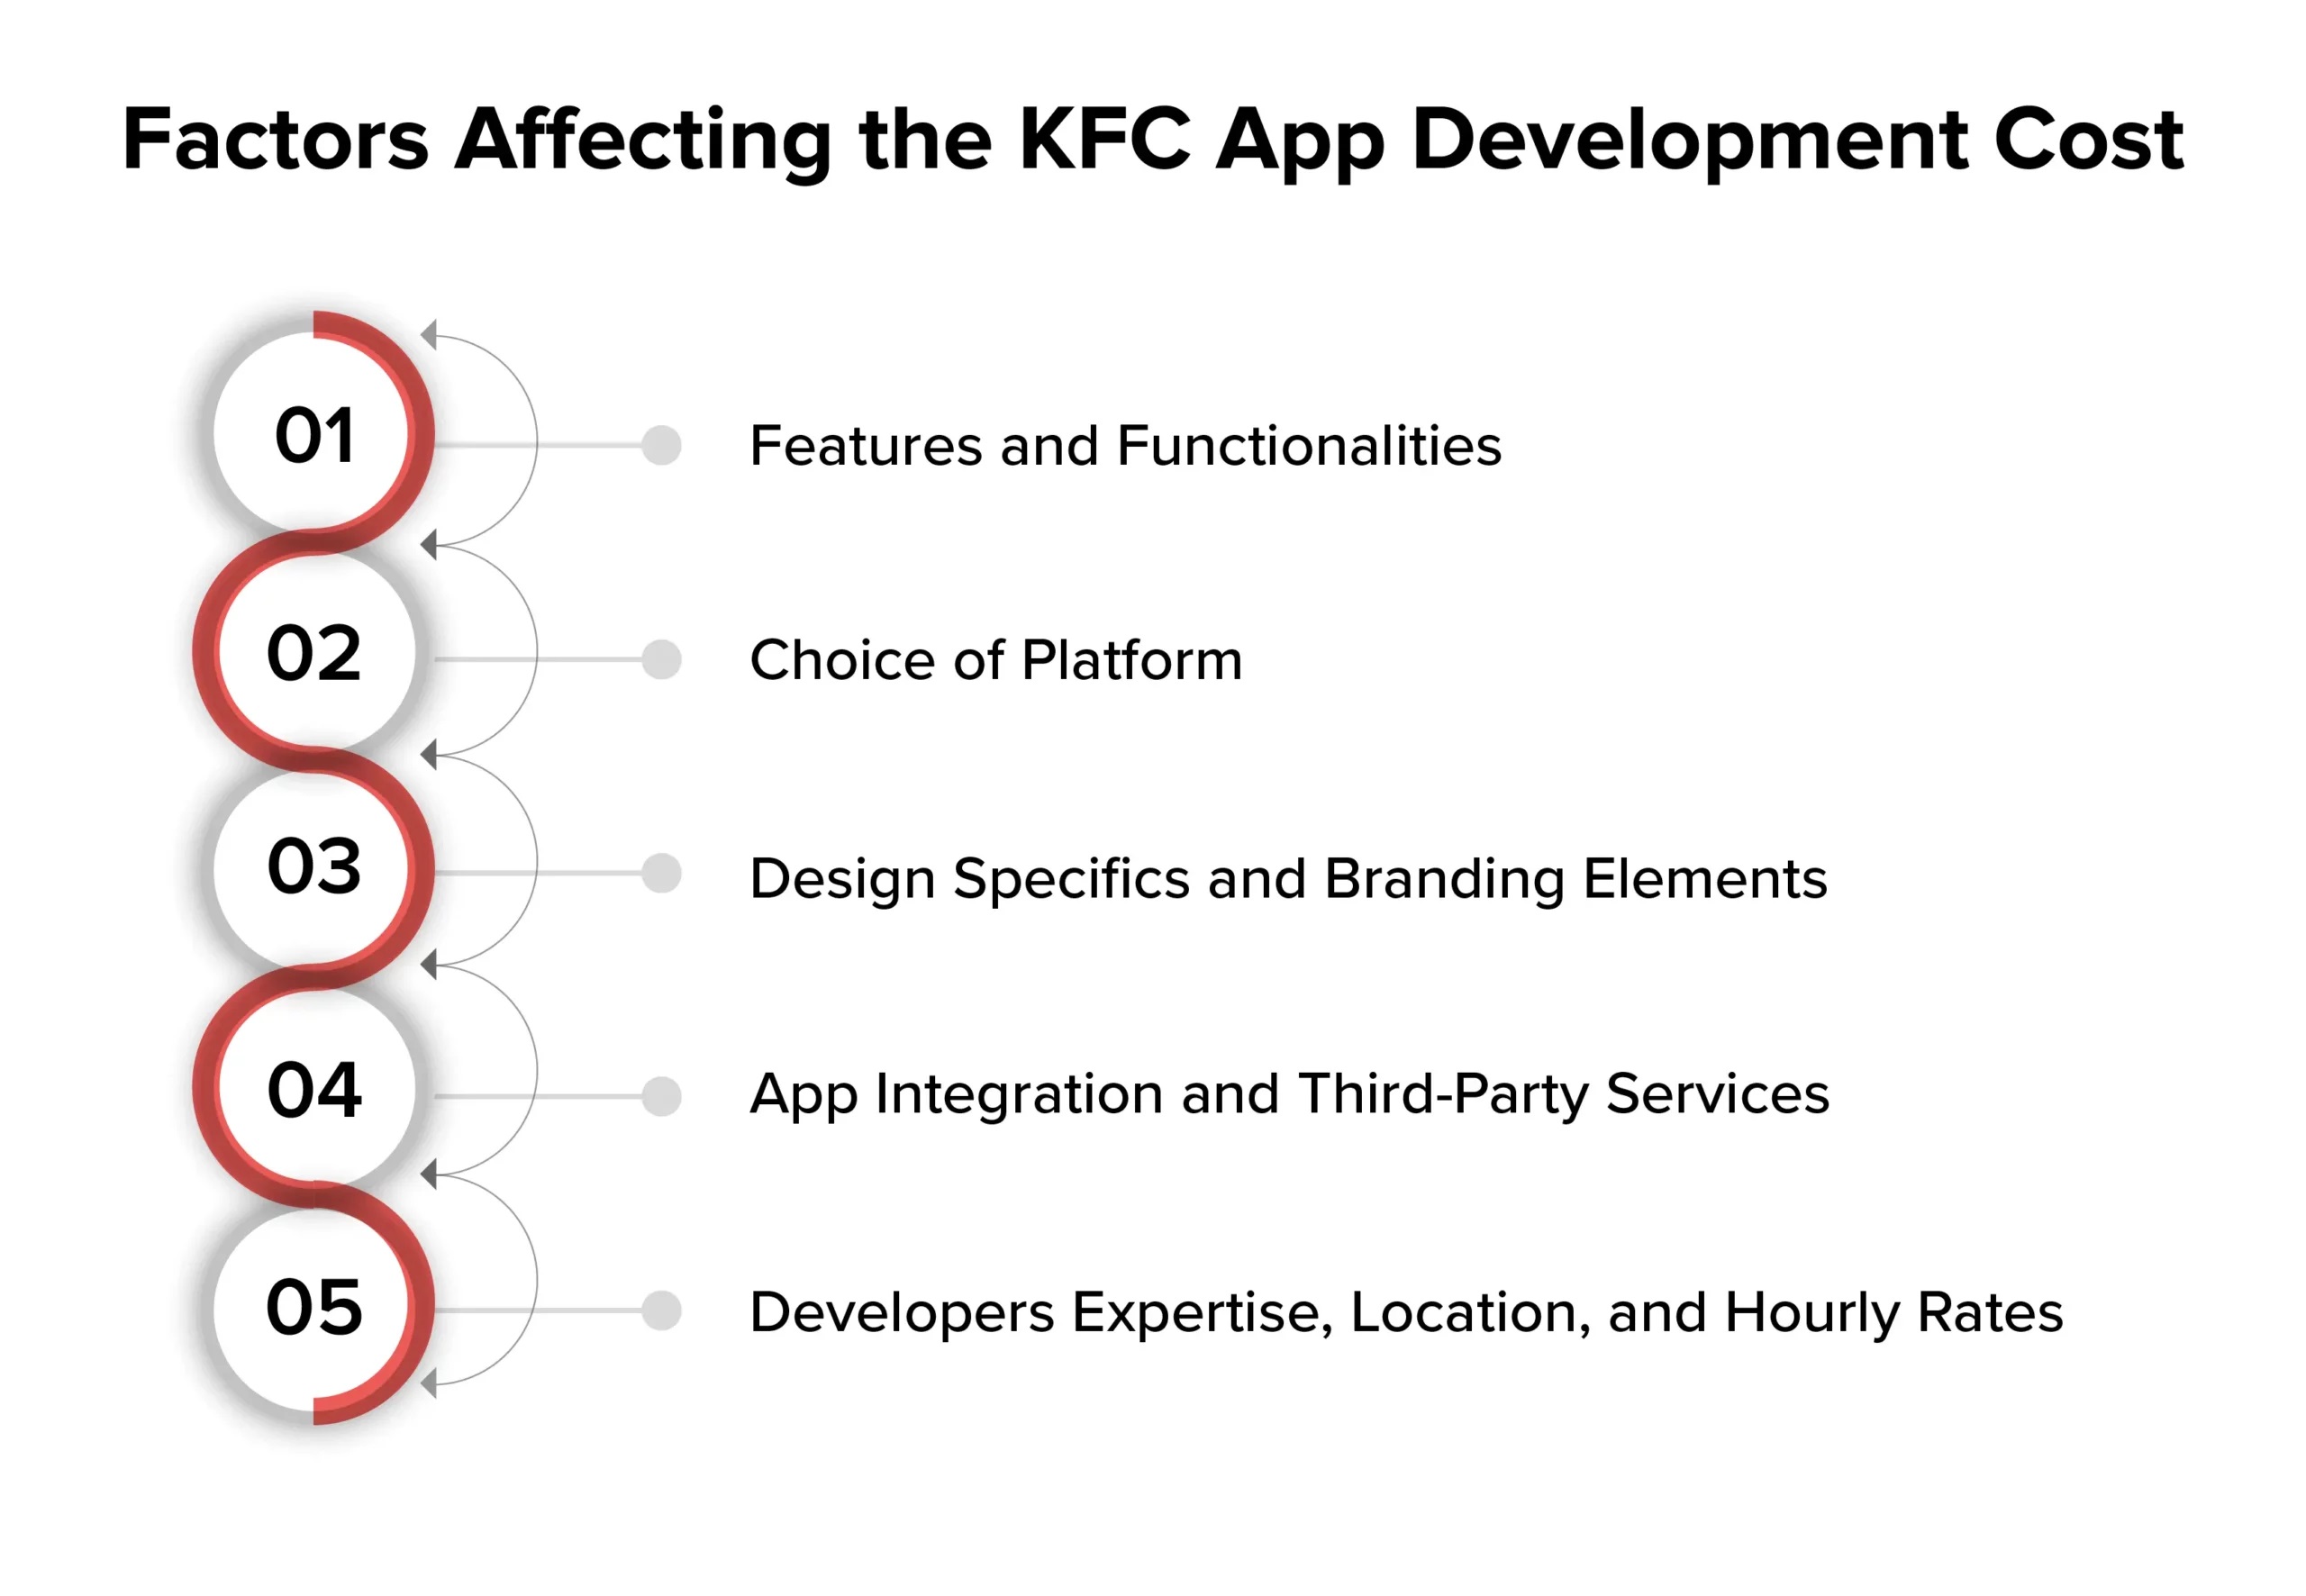 8 Major Factors Affecting the Cost to Build an App Like KFC